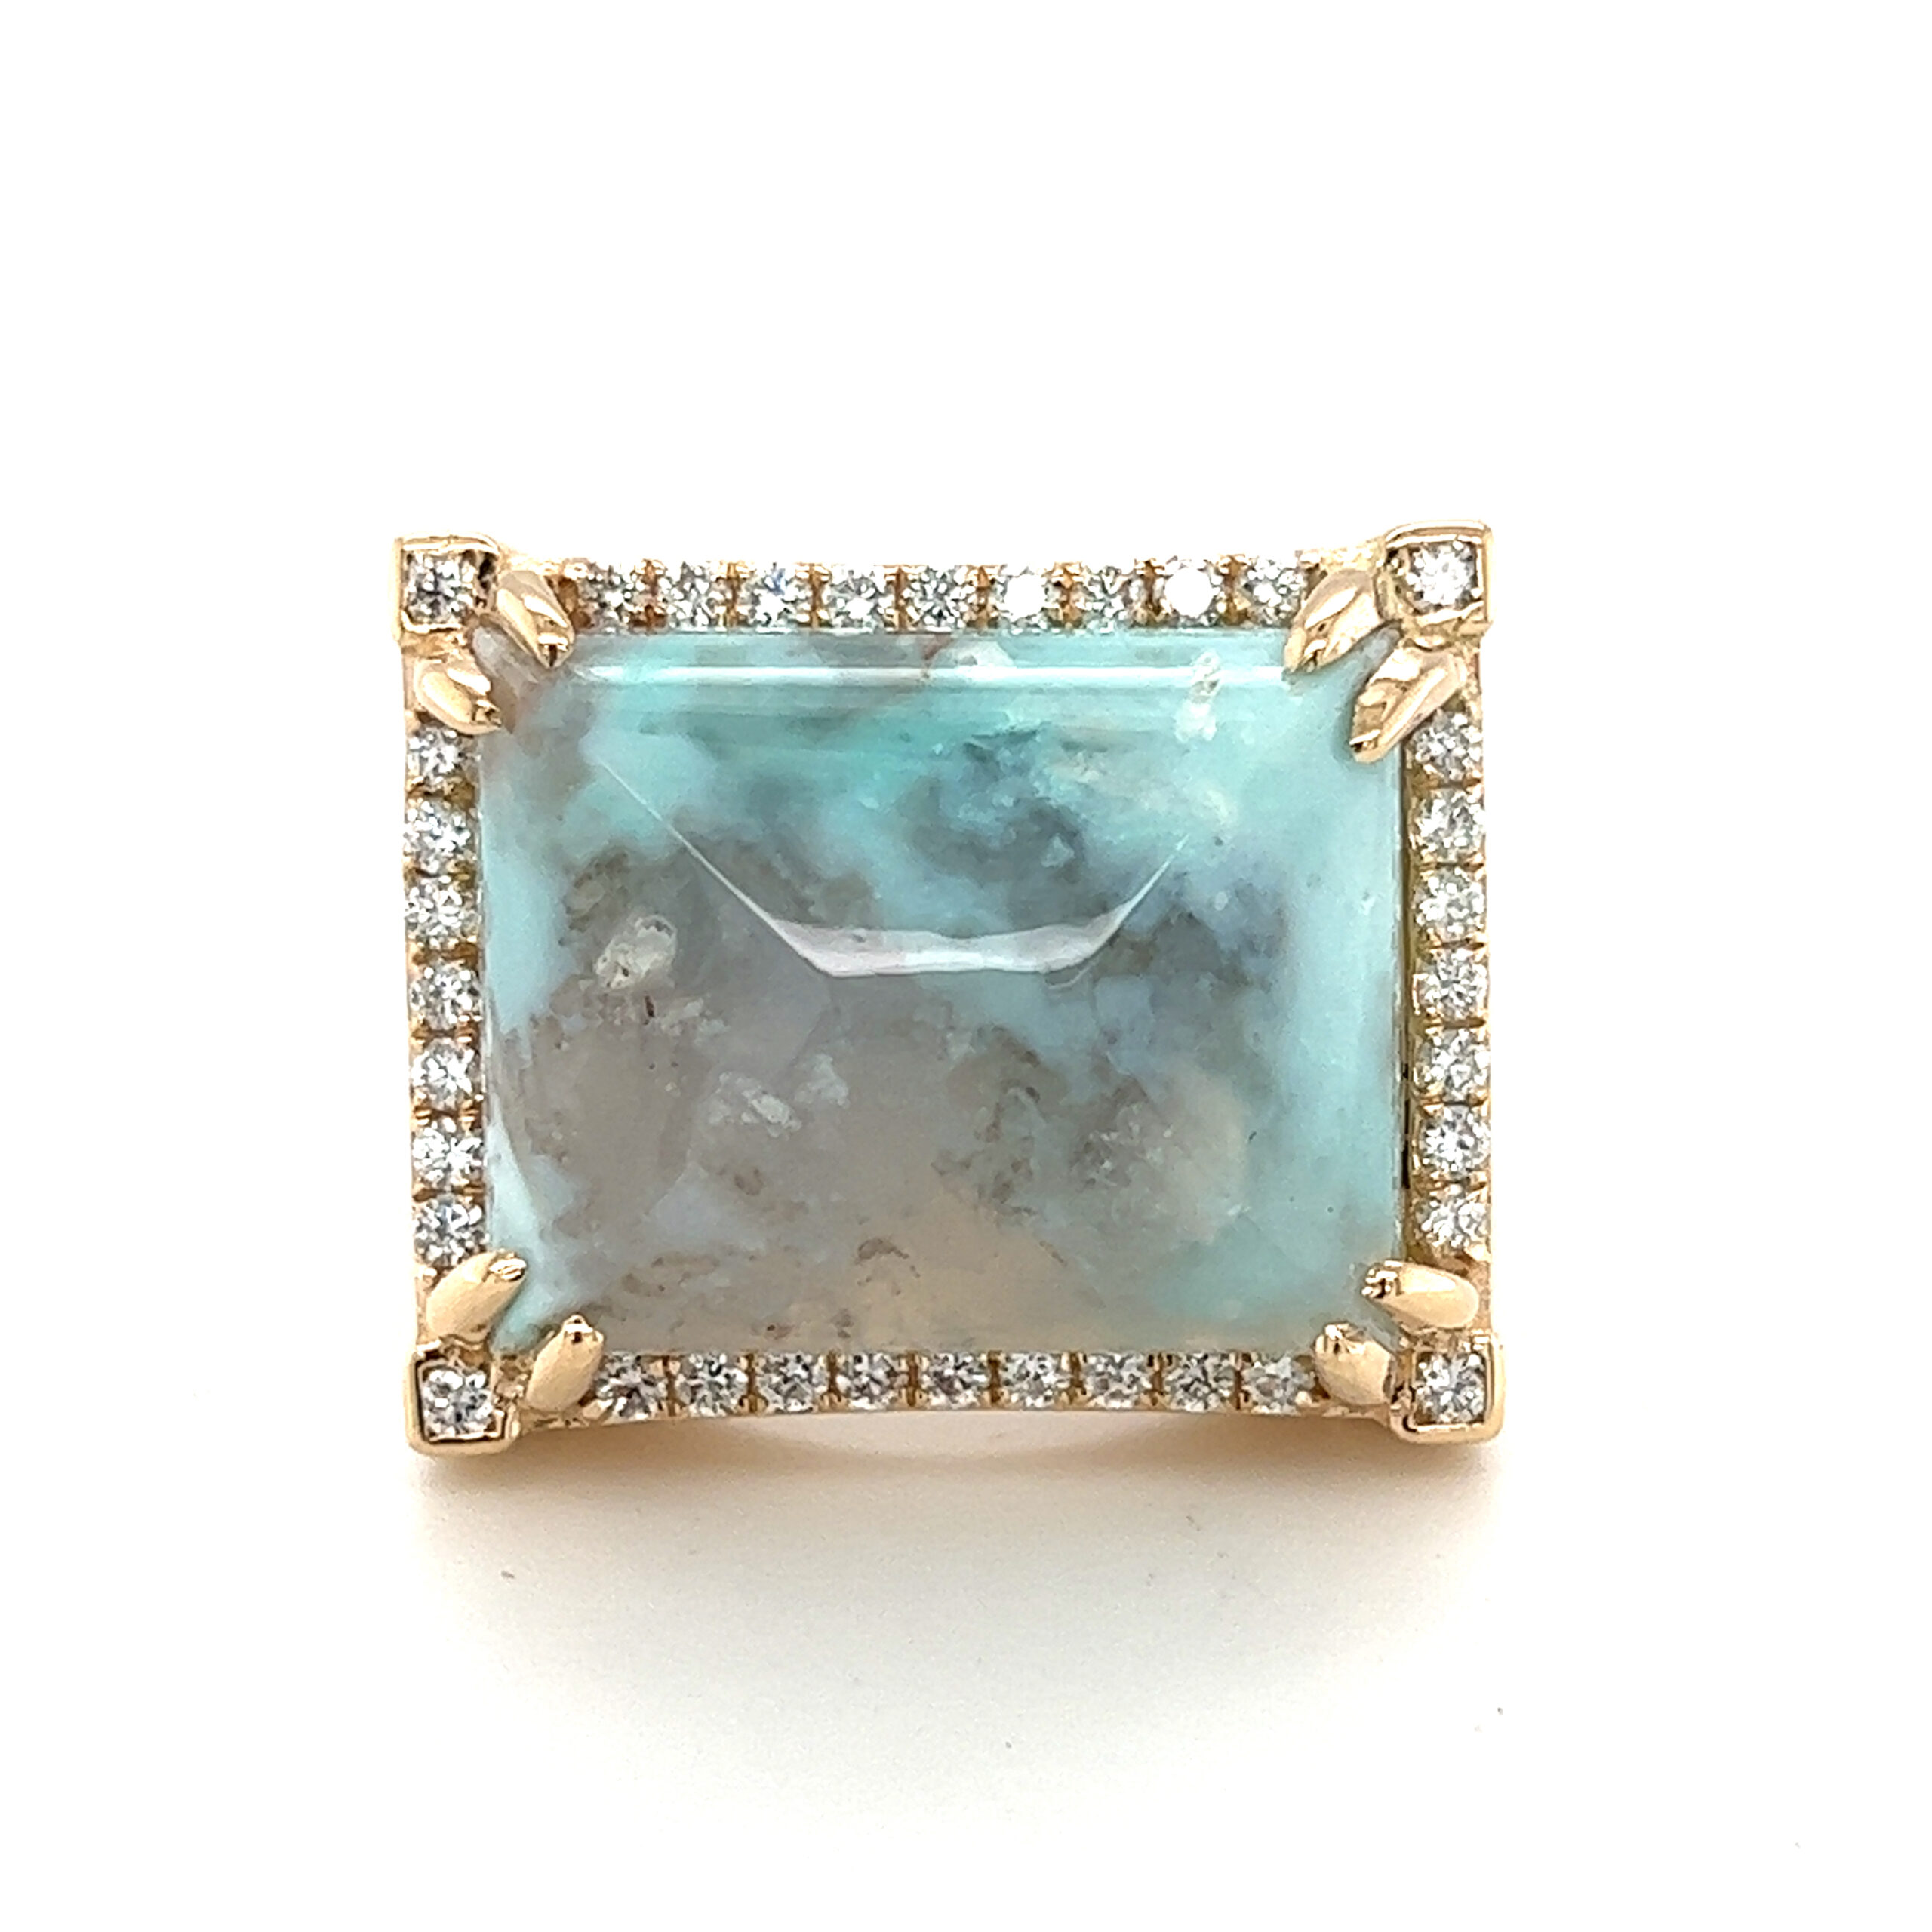 Featured image for “Aquaprase Statement Ring”